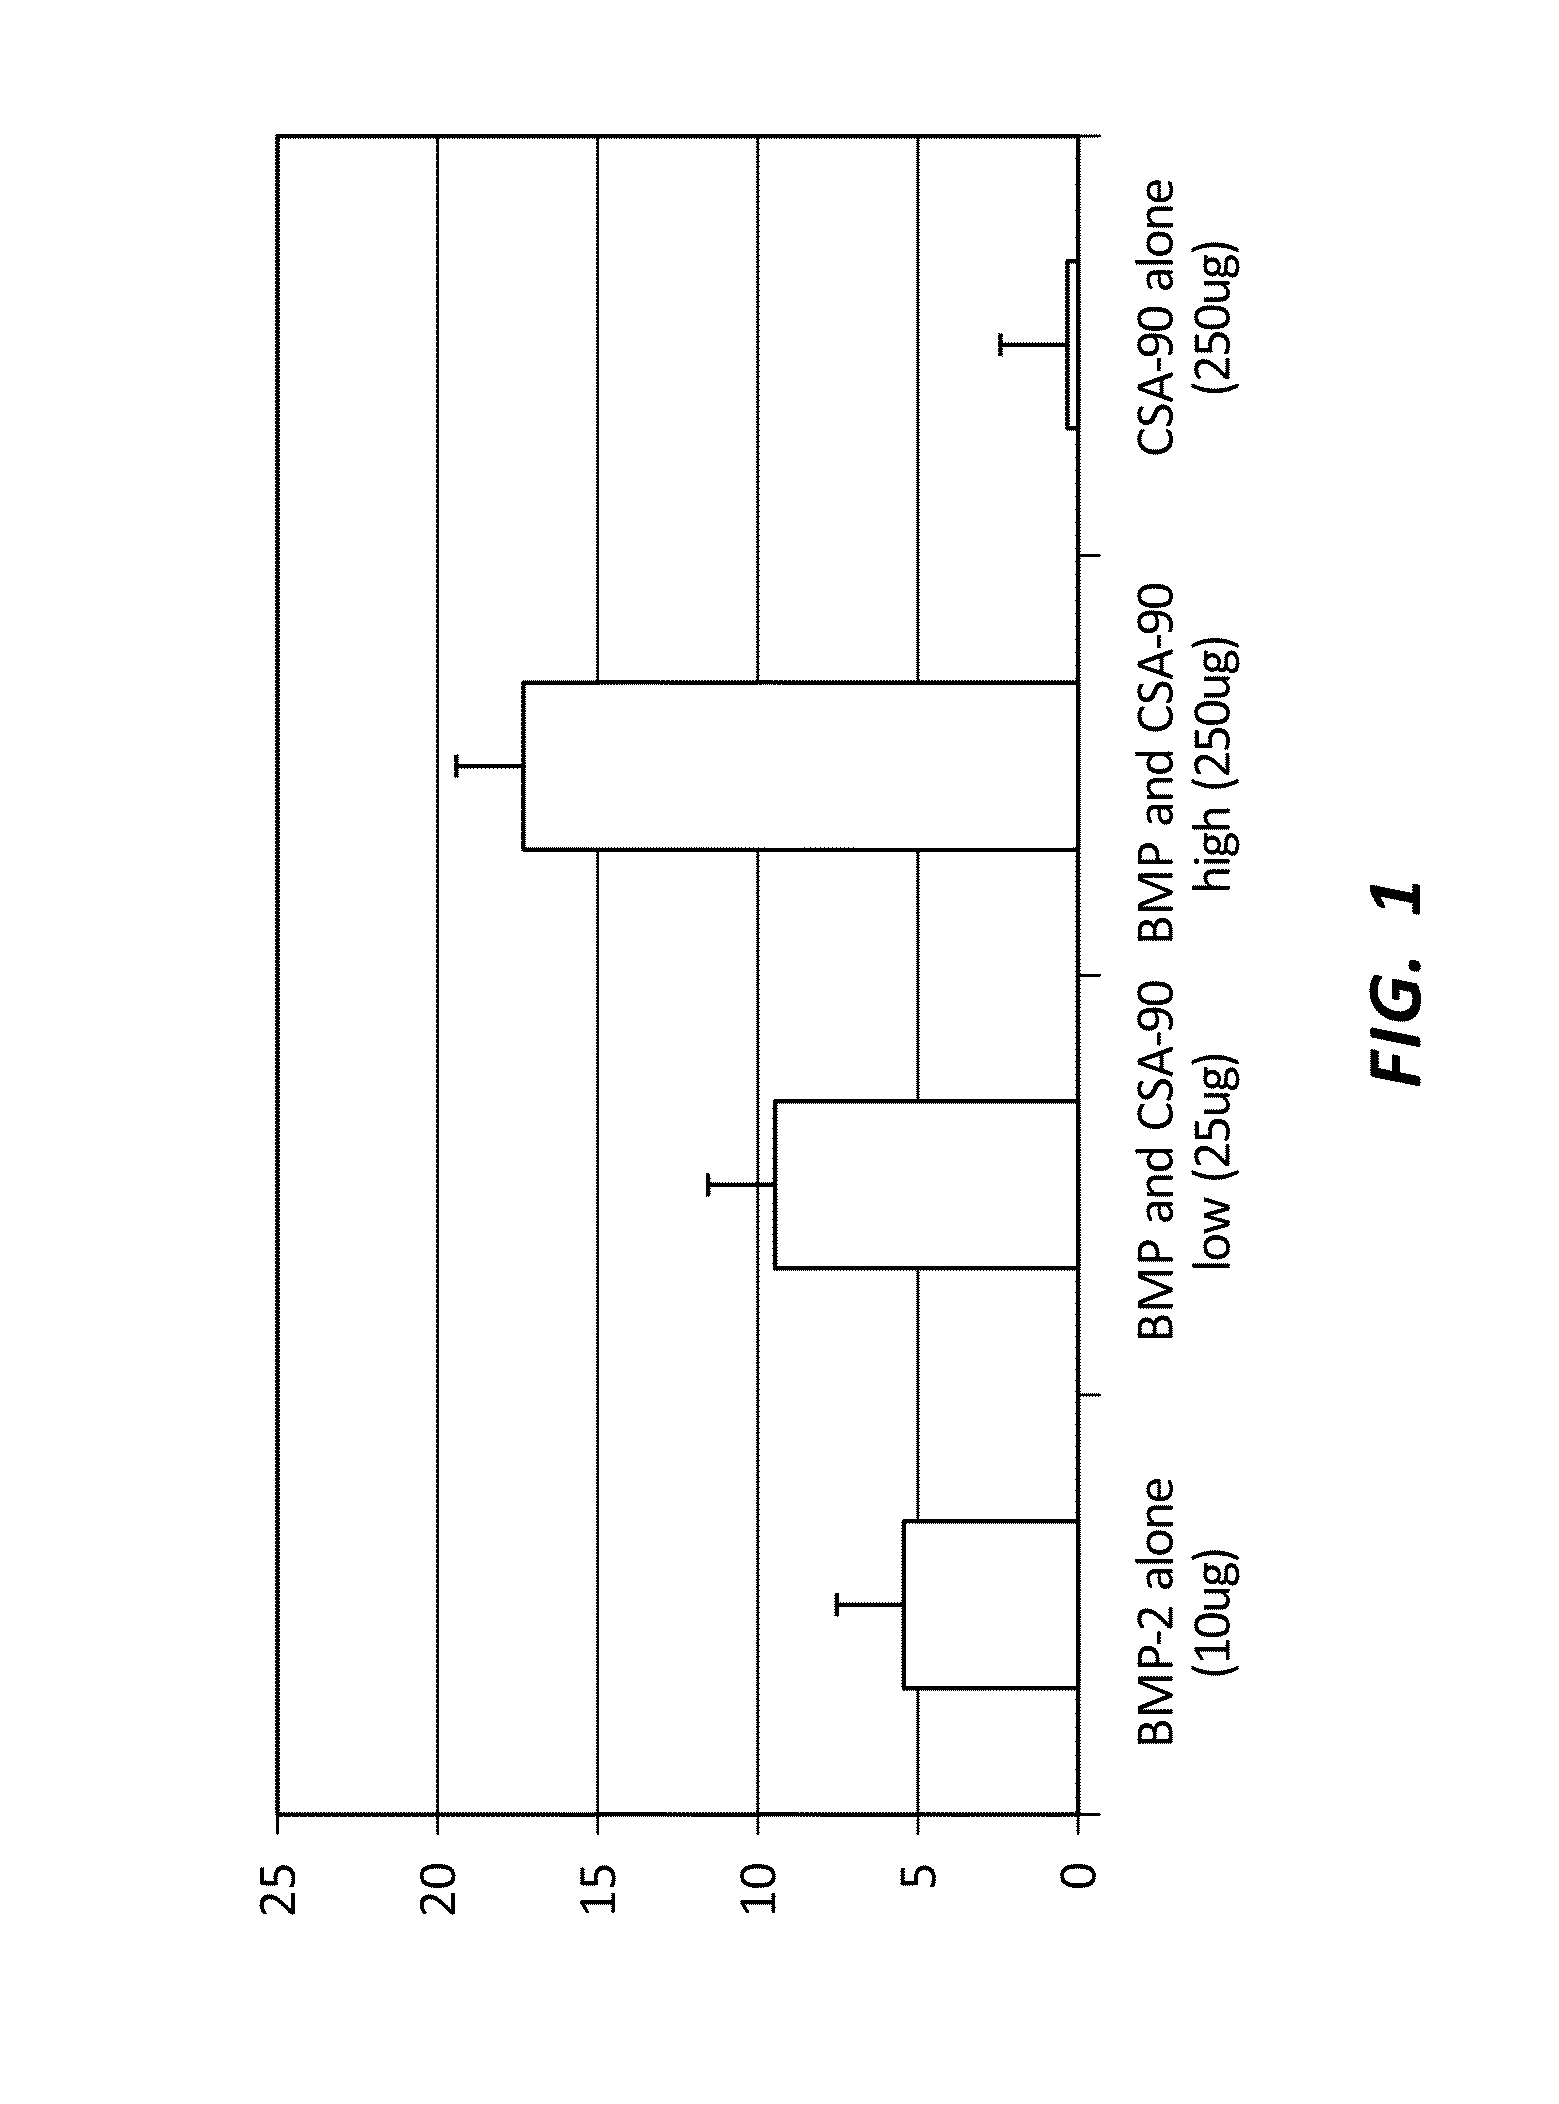 Anti-infective and osteogenic compositions and methods of use